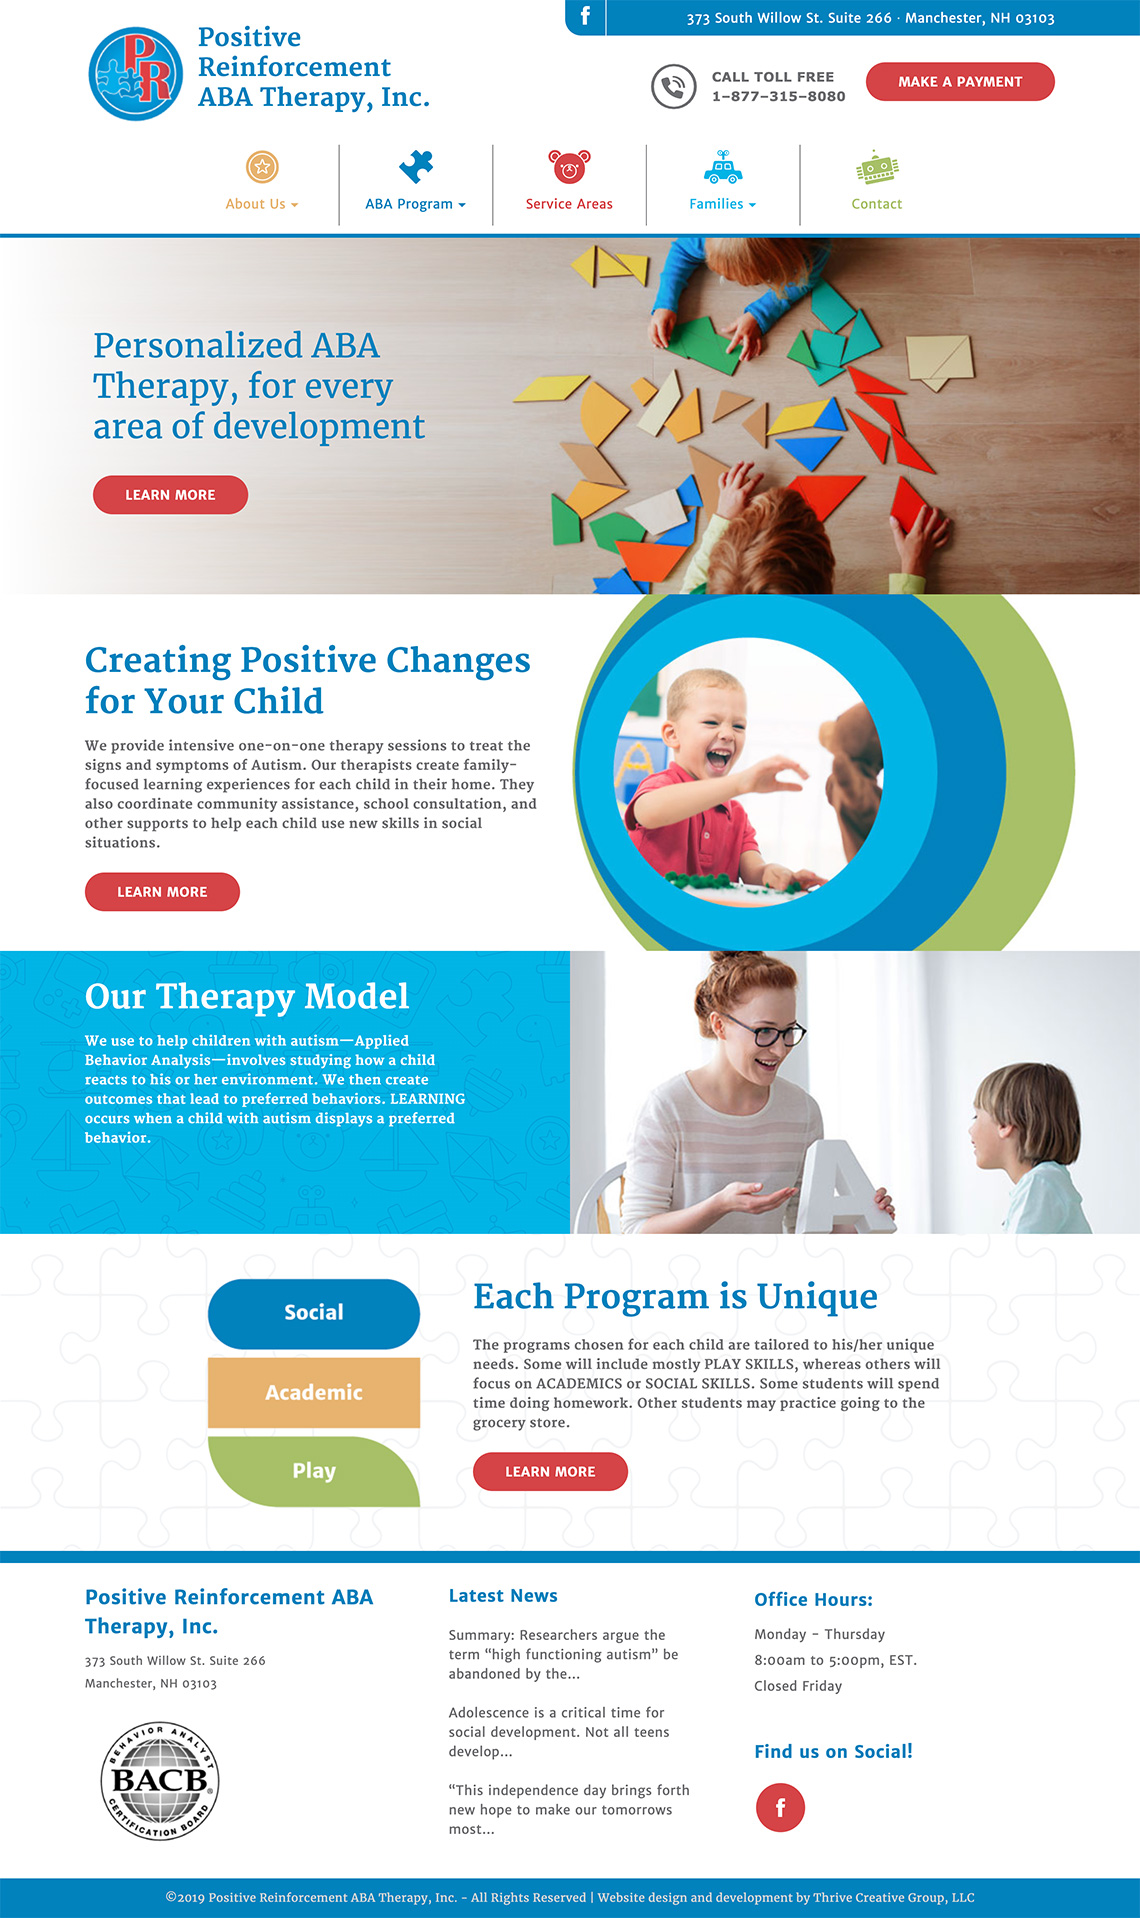 Positive-Reinforcement-ABA-Therapy-website-design